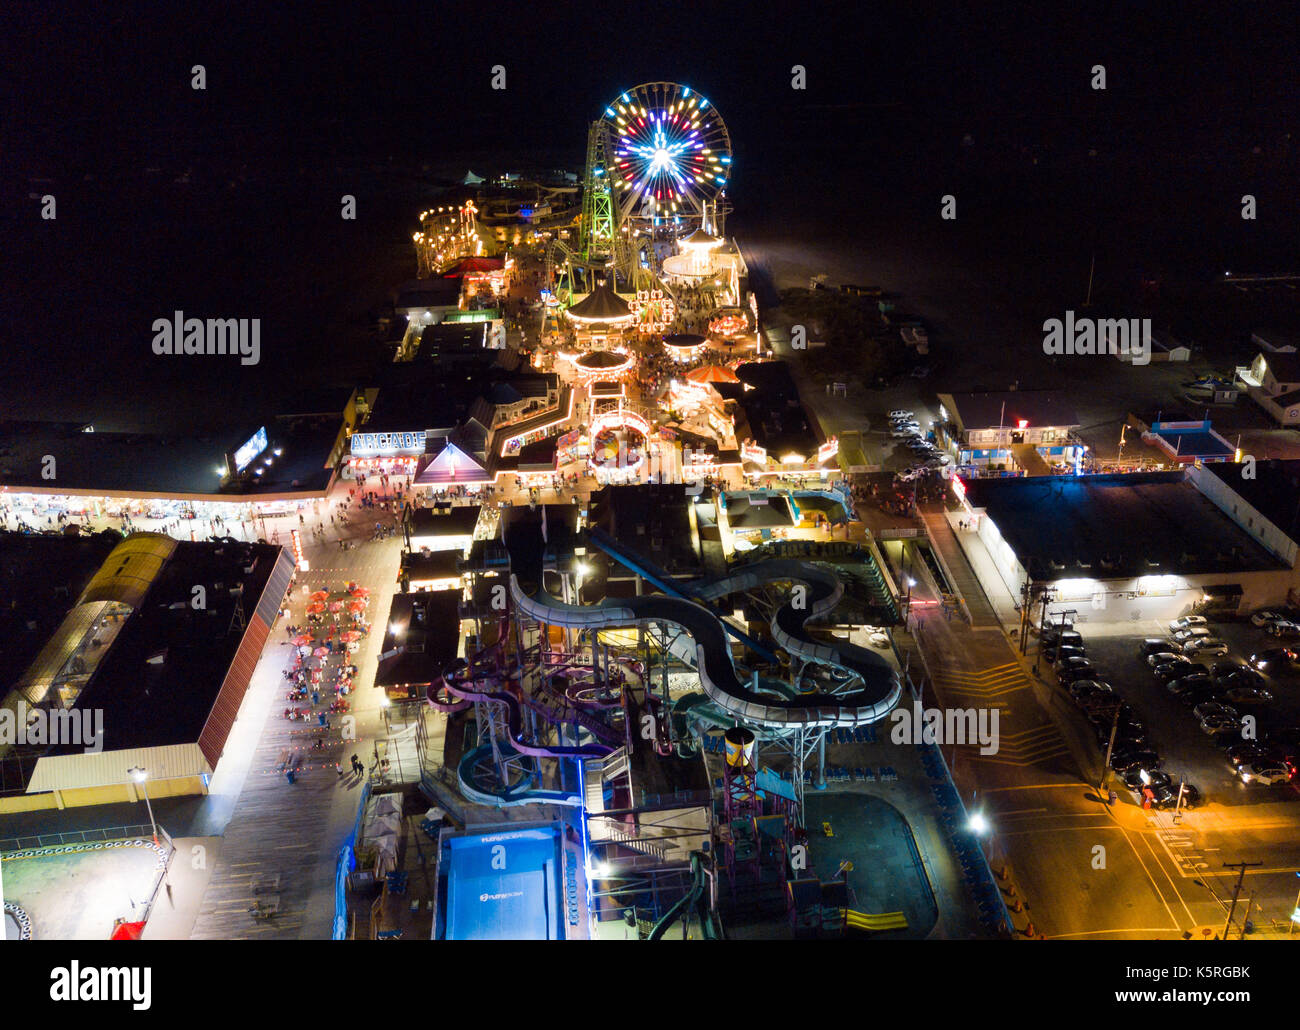 amusement park photo taken from the sky at night Stock Photo